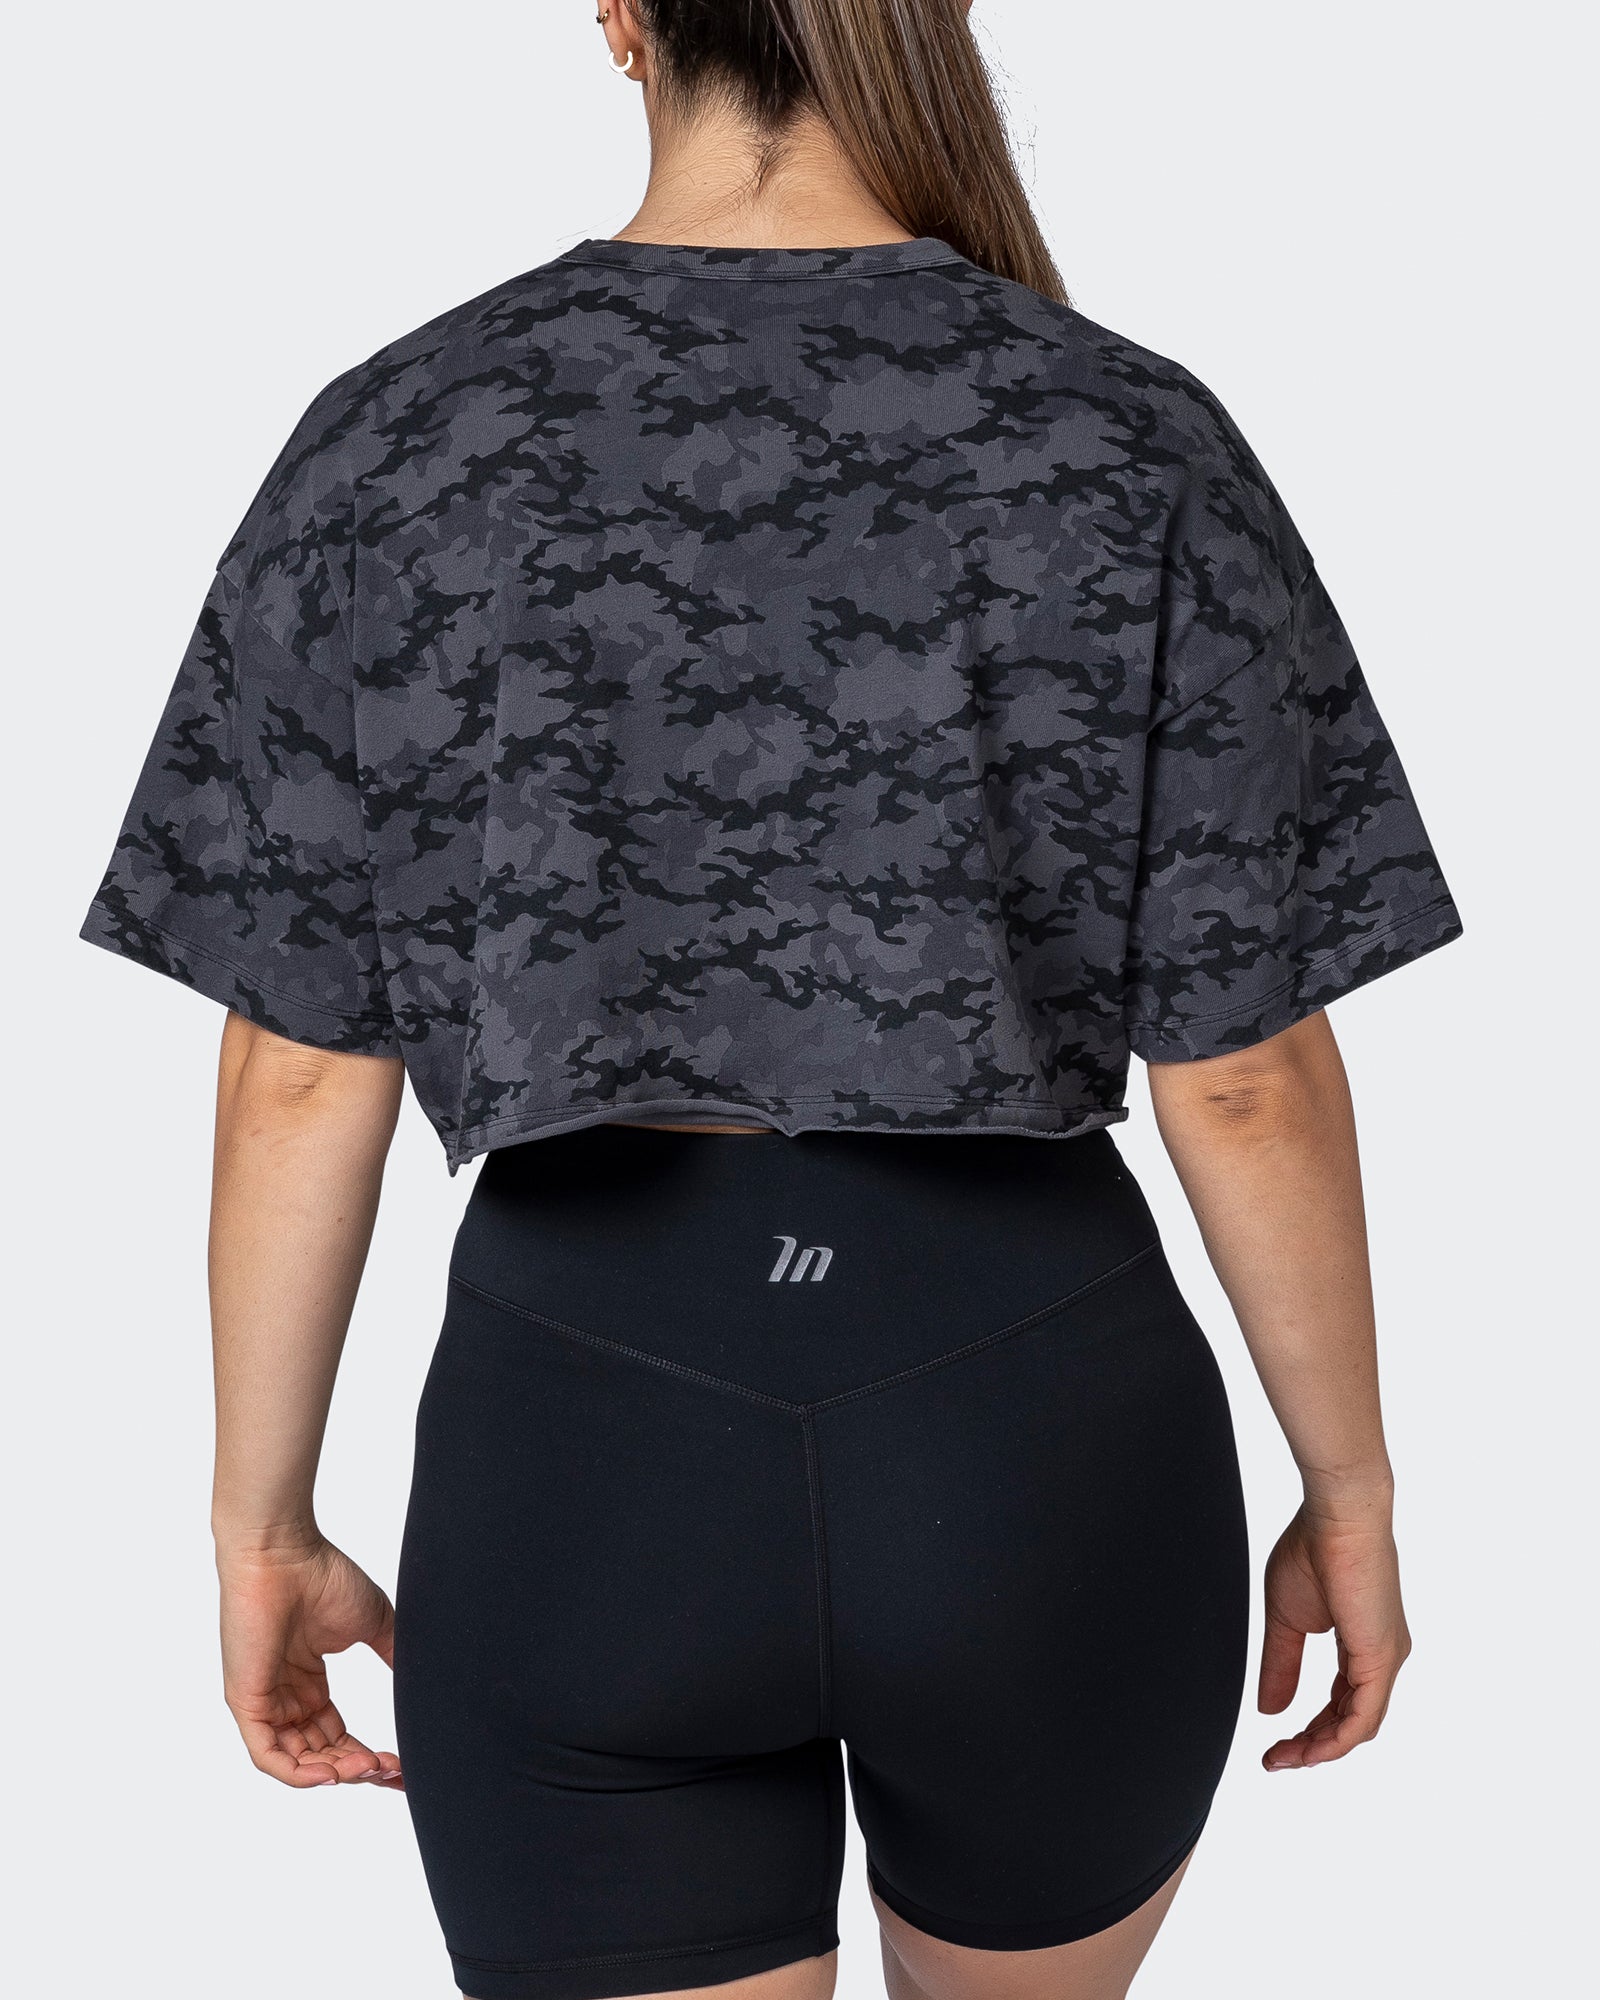 musclenation Crop Tops Camo Cropped Heavy Vintage Tee - Washed Monochrome Camo Print